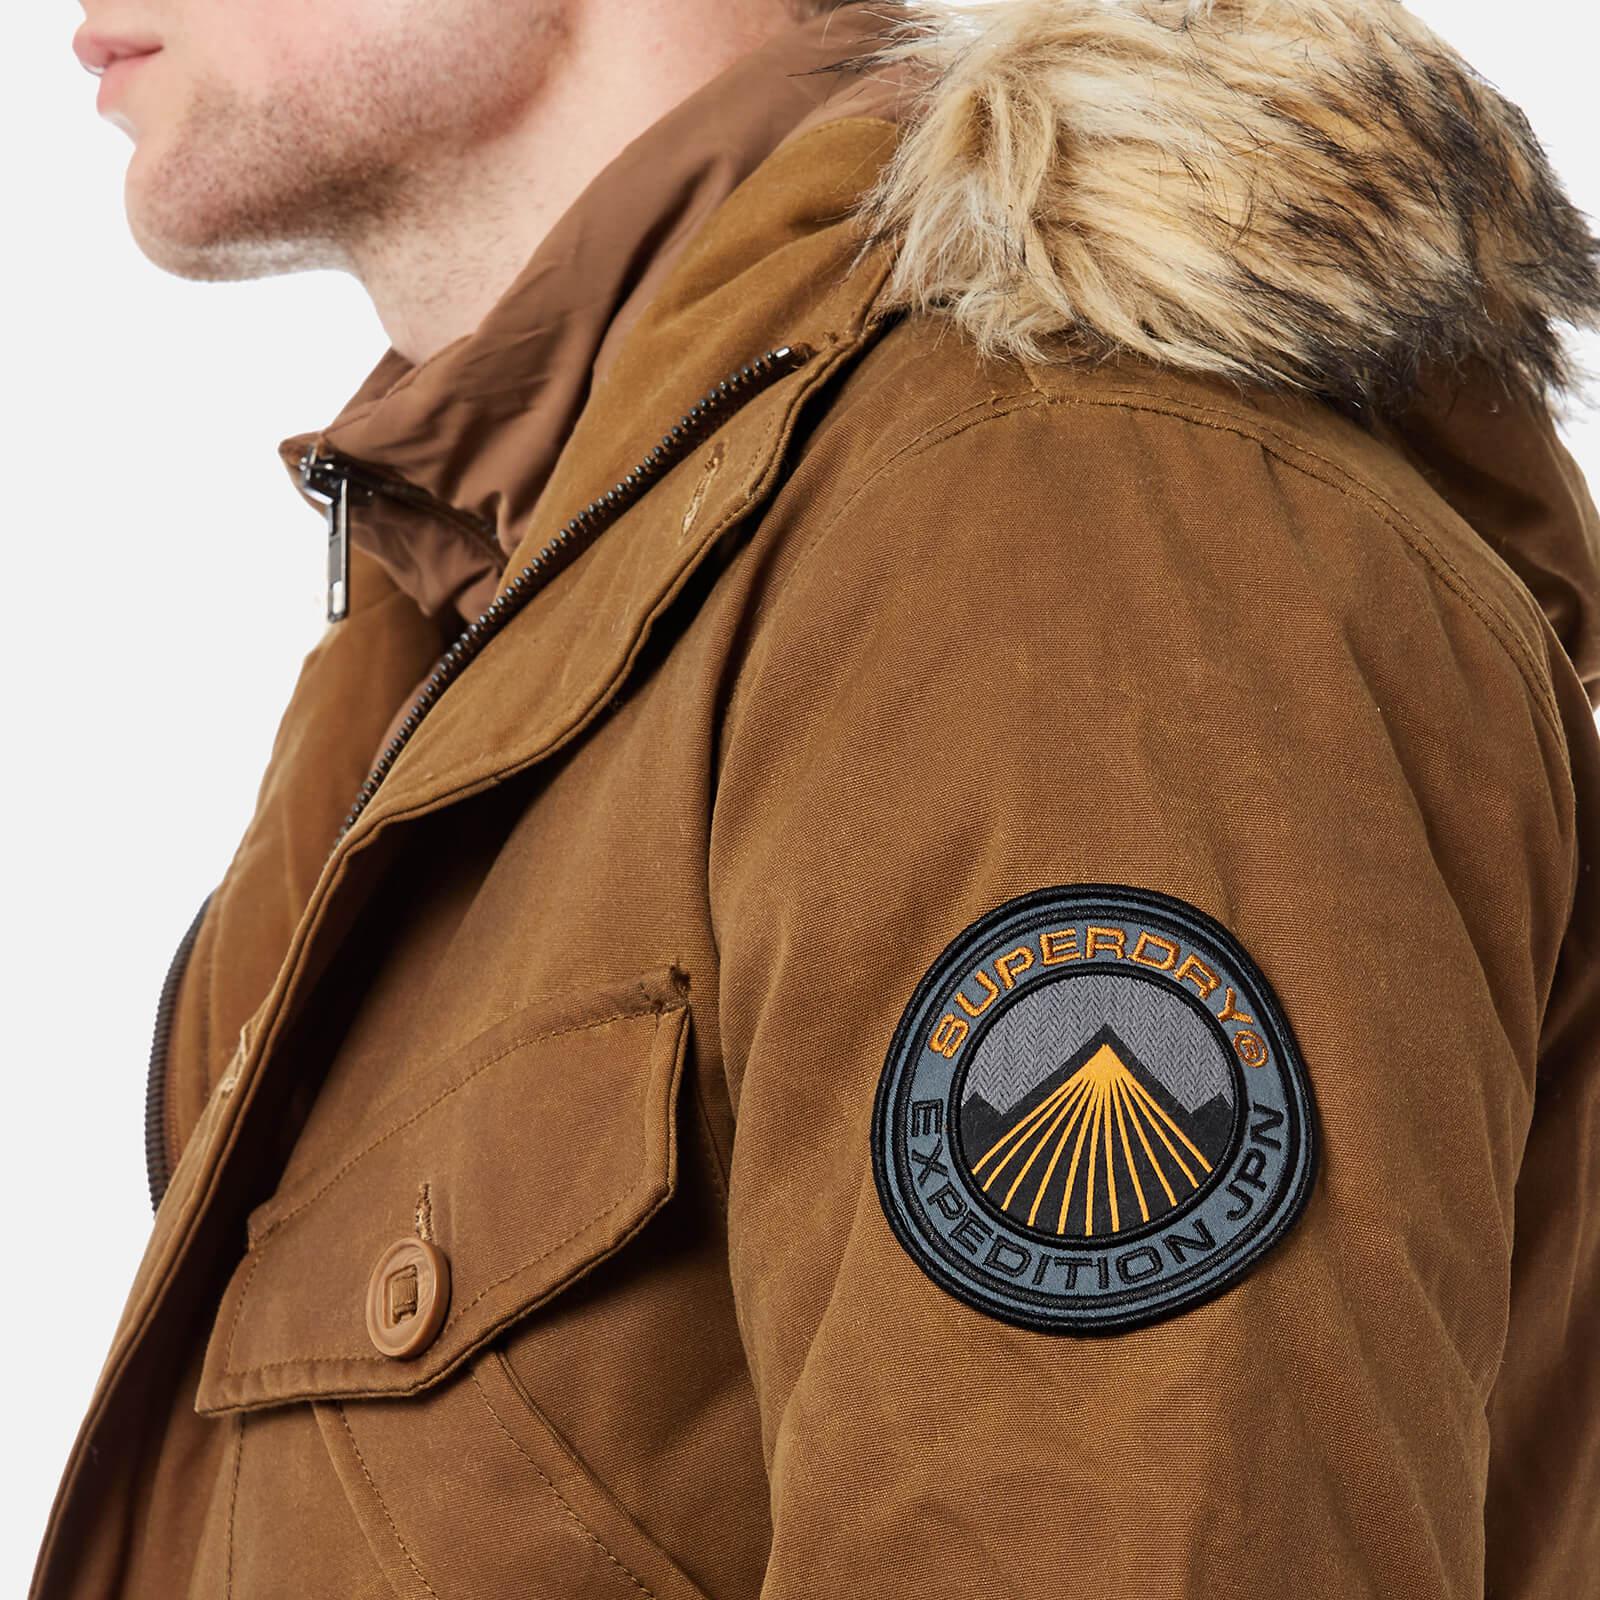 Superdry Everest Wax Jacket in Tobacco (Brown) for Men - Lyst